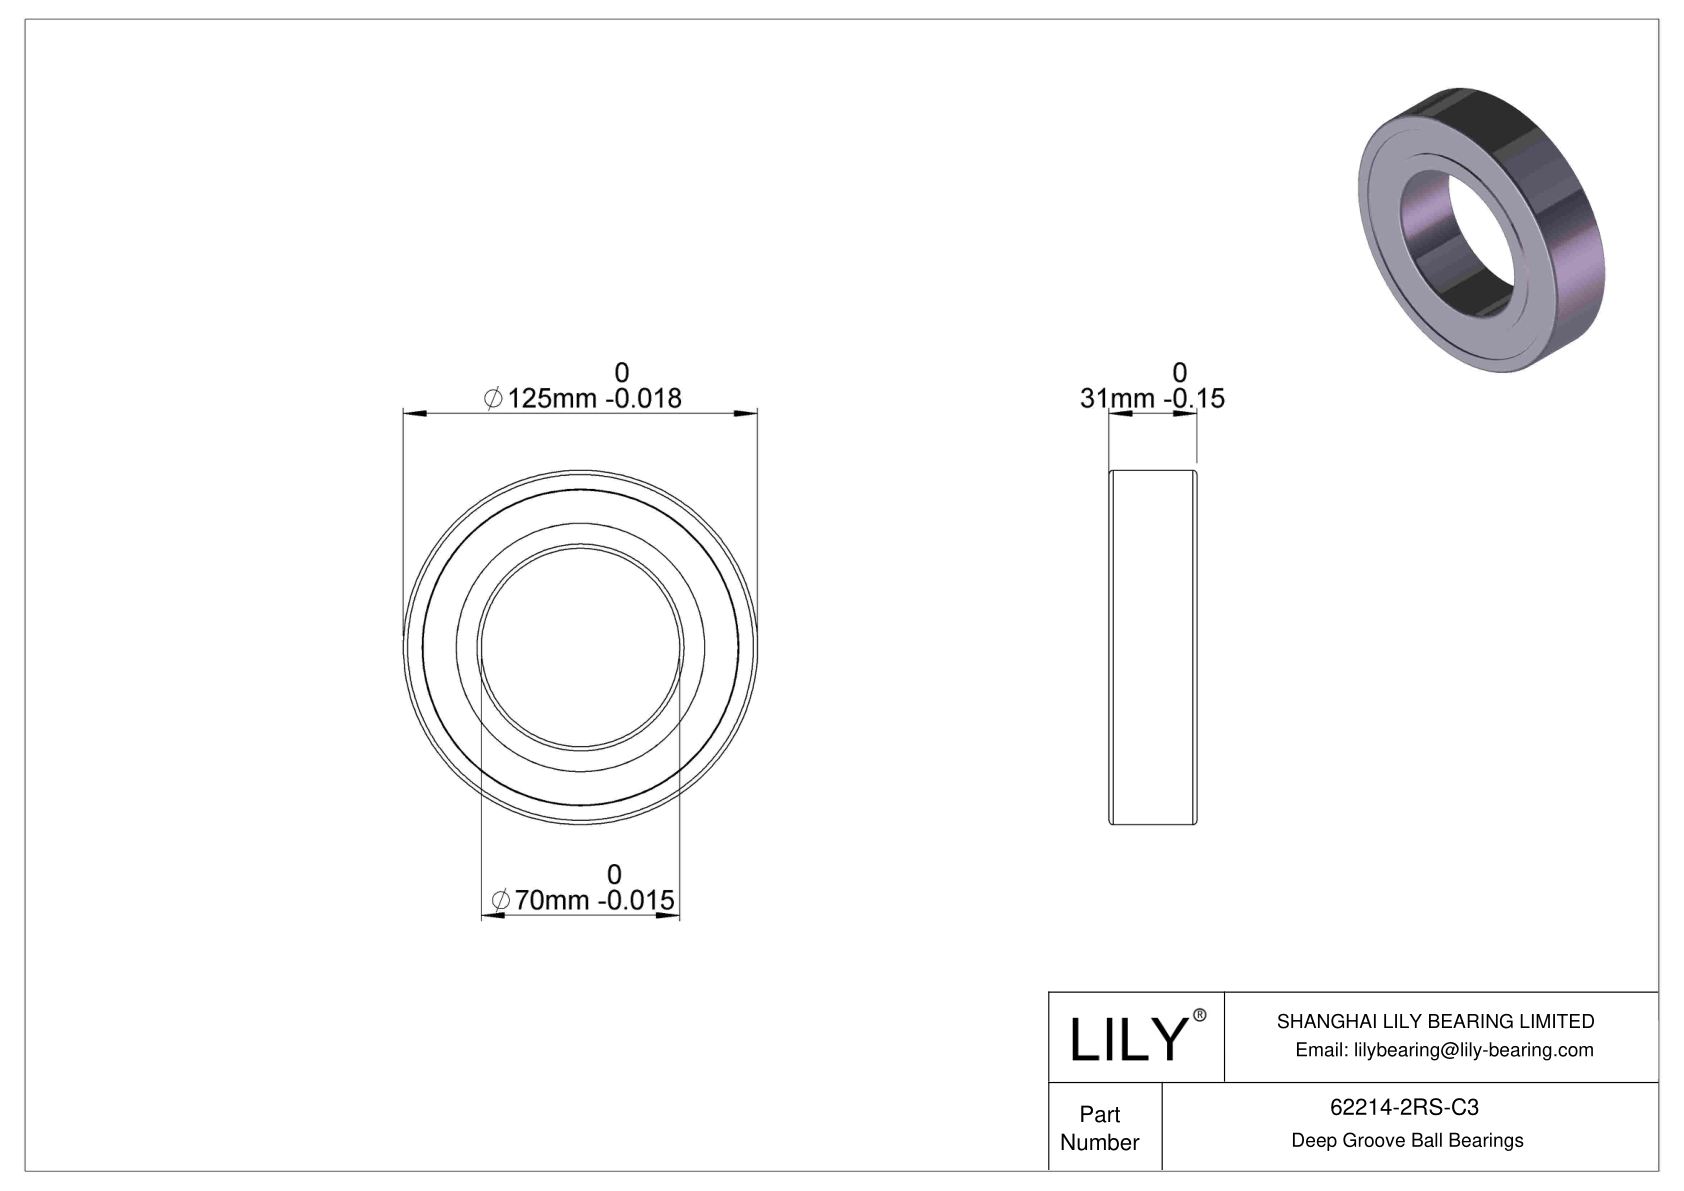 62214-2RS-C3 Wide Section Ball Bearings (62000, 63000) cad drawing